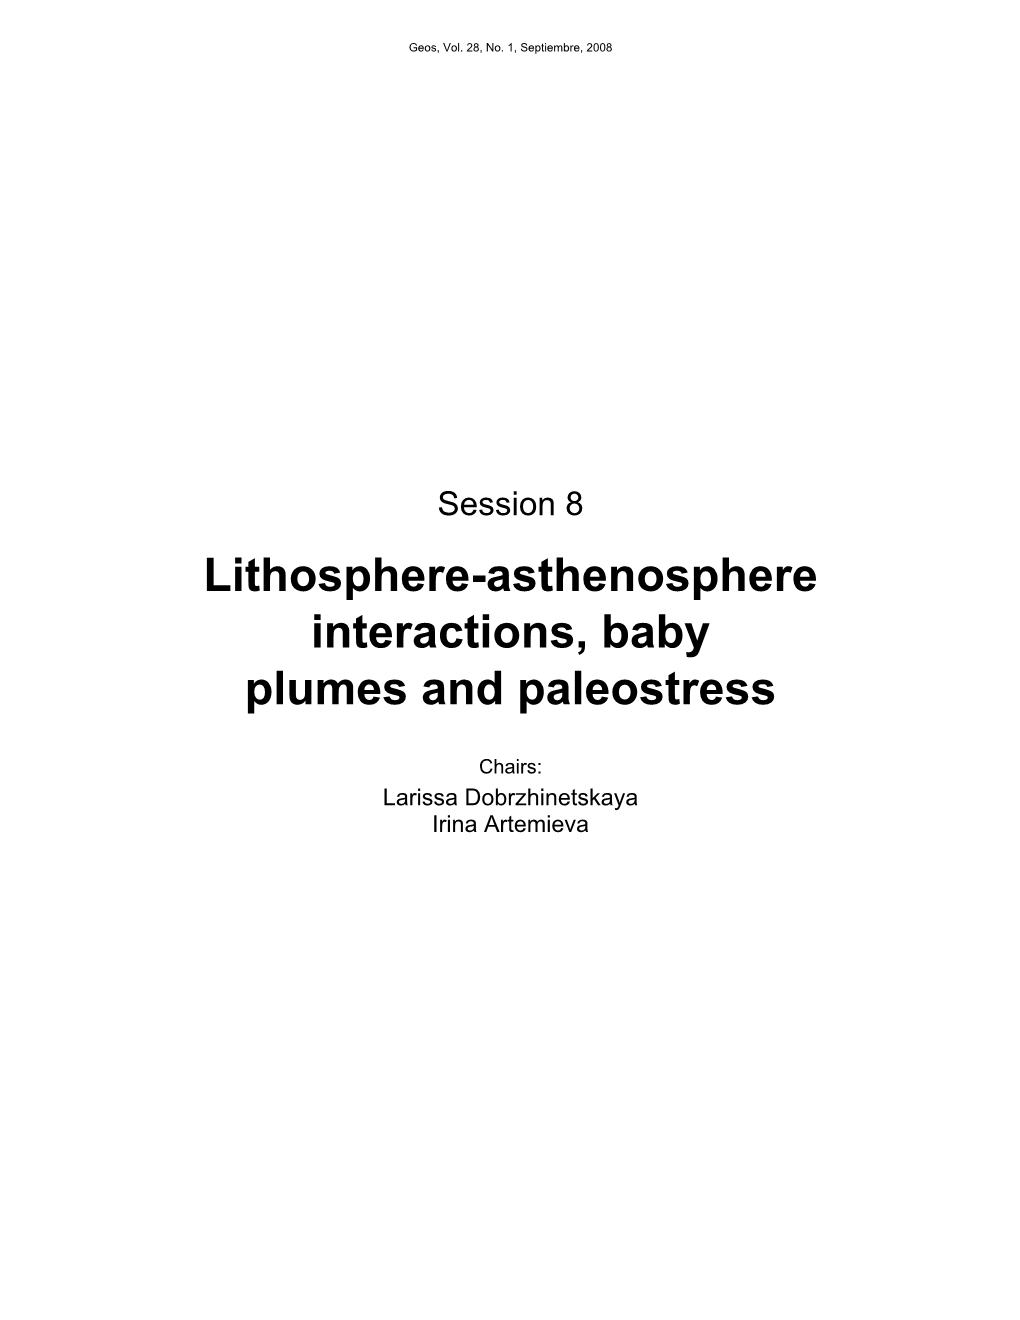 Lithosphere-Asthenosphere Interactions, Baby Plumes and Paleostress